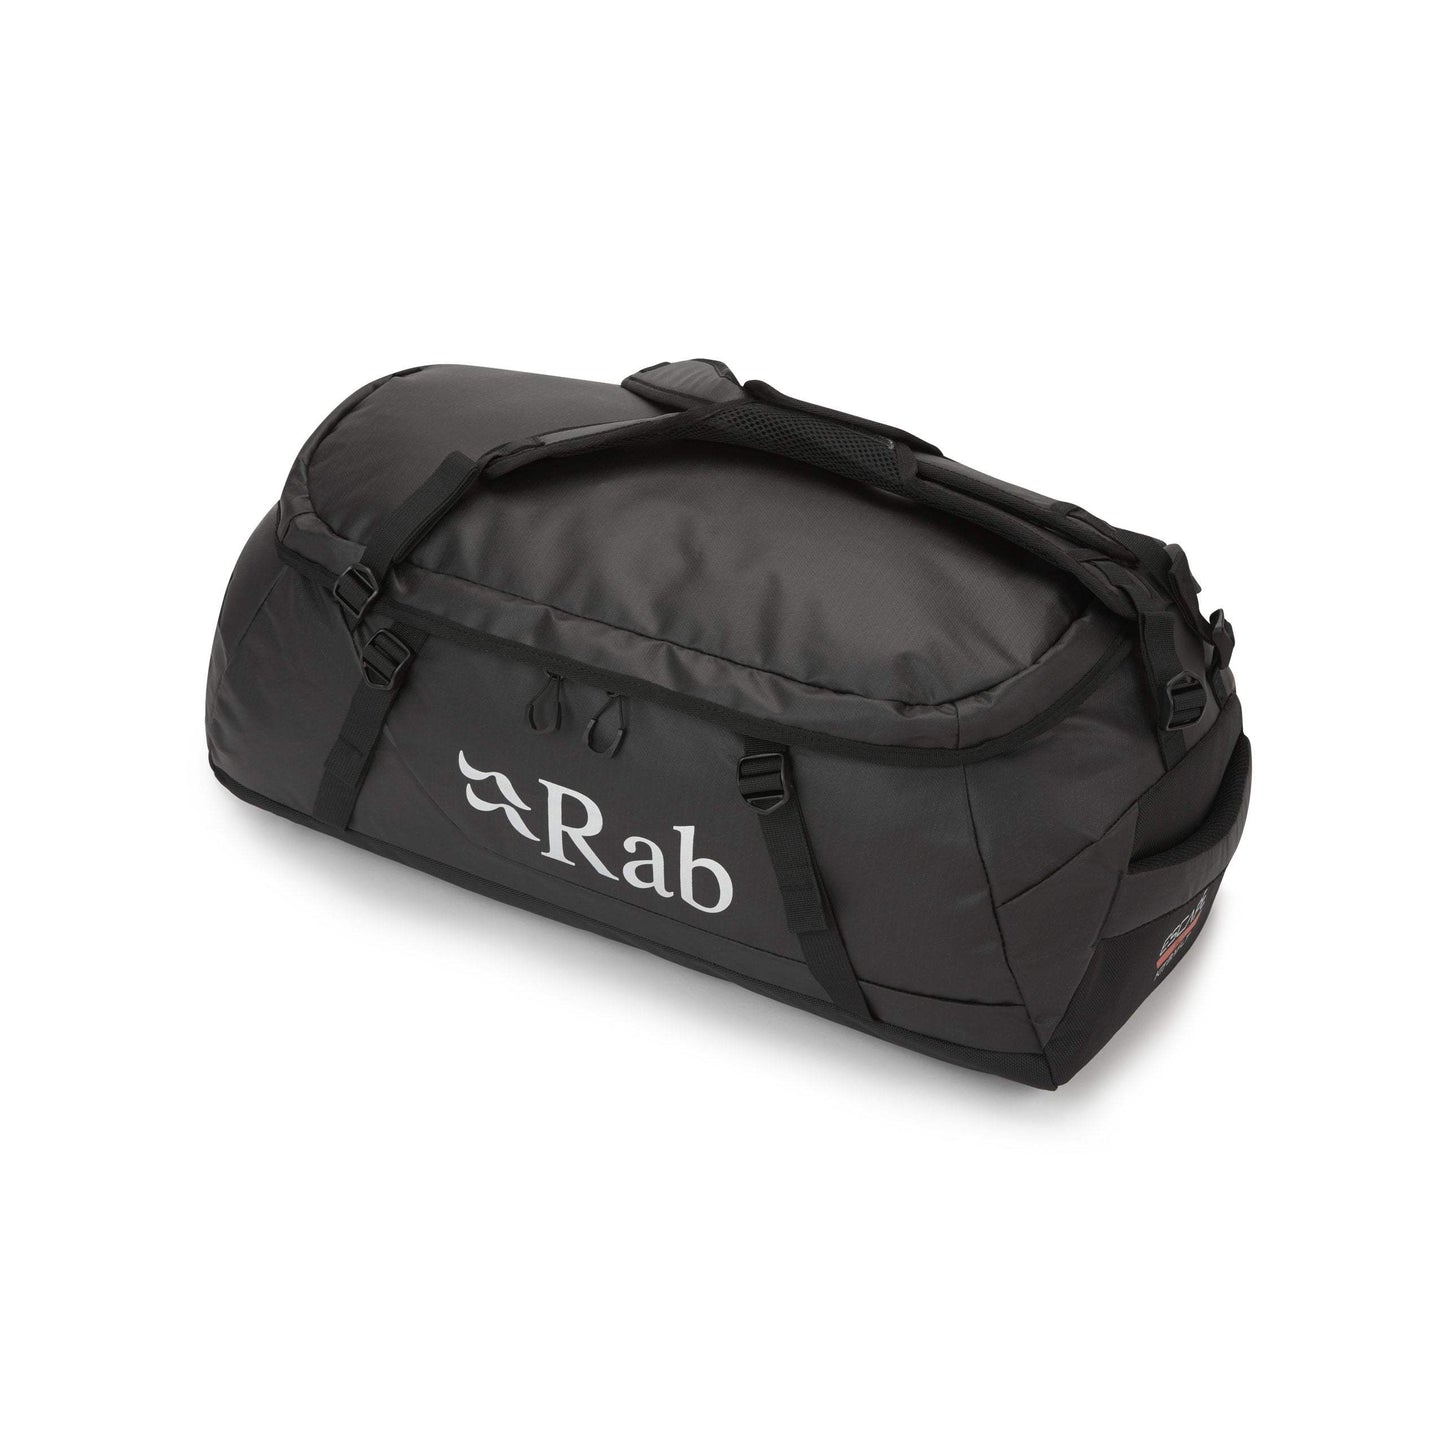 Escape Kit Bag Lt 50 by RAB - The Luxury Promotional Gifts Company Limited